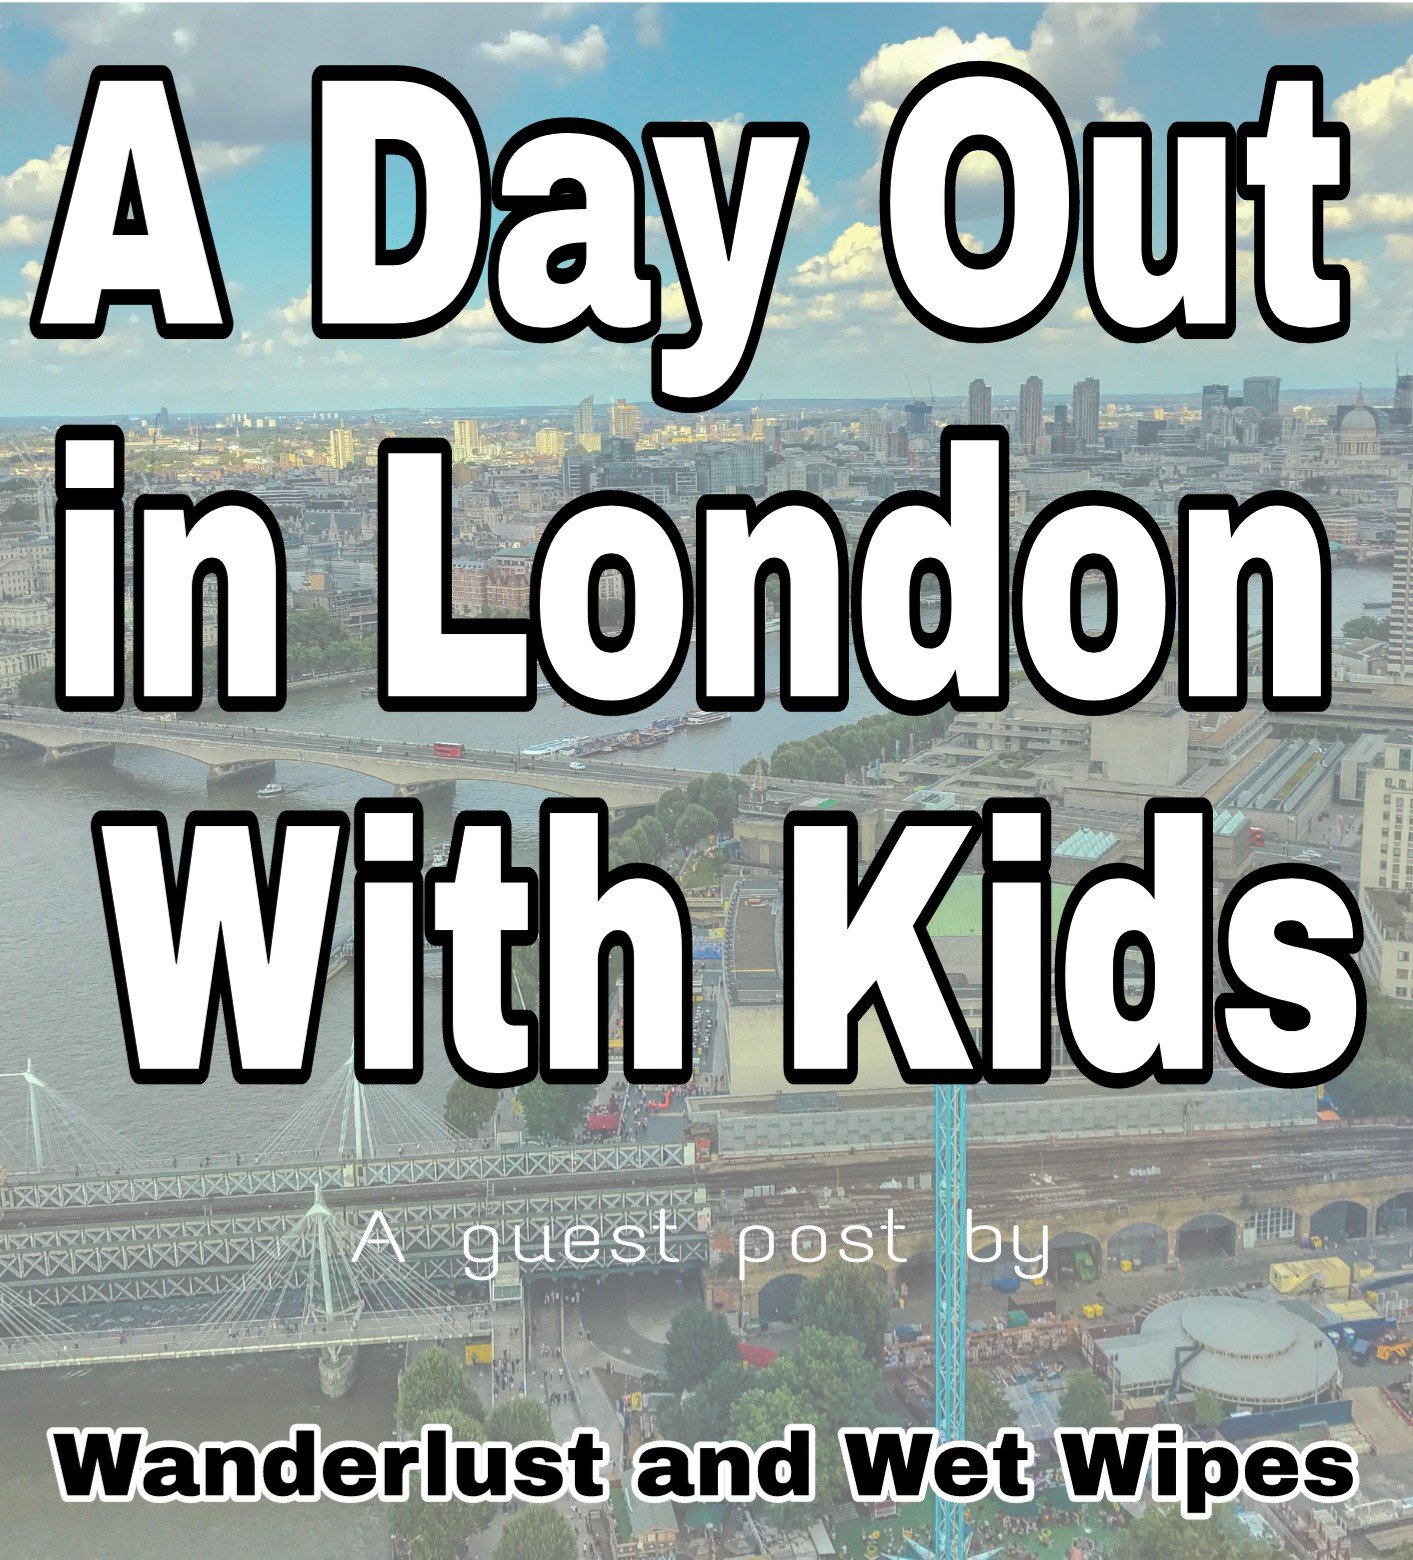 A Day Out in London With Kids - a guest post by Wanderlust and Wet Wipes title with faded image of London background